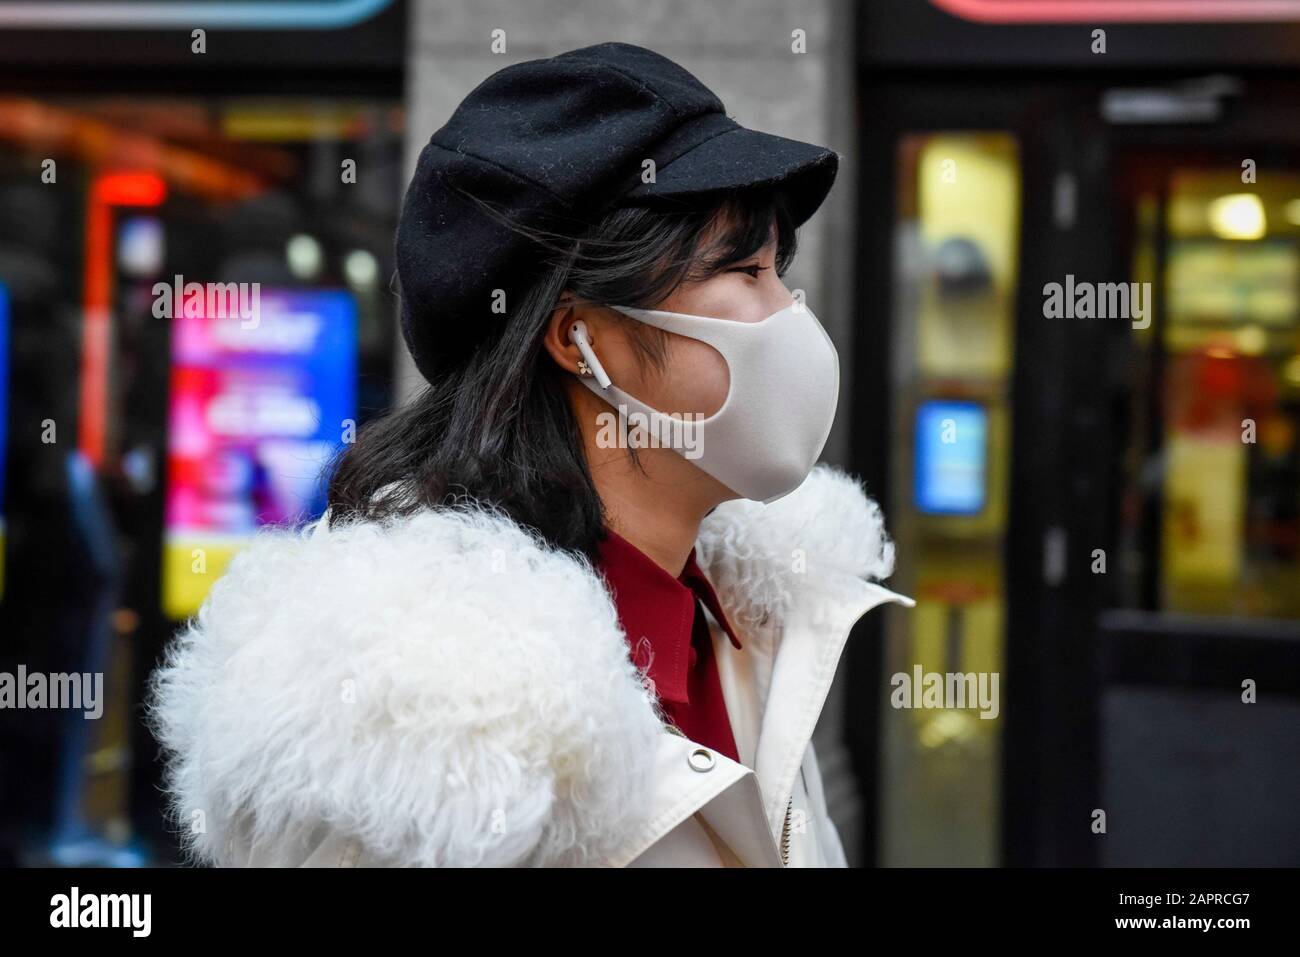 London, UK.  24 January 2019. A woman wears a facemask, possibly in reaction to the outbreak of the coronavirus in Wuhan, China, in Chinatown ahead of Chinese New Year, the Year of the Rat.   Credit: Stephen Chung / Alamy Live News Stock Photo